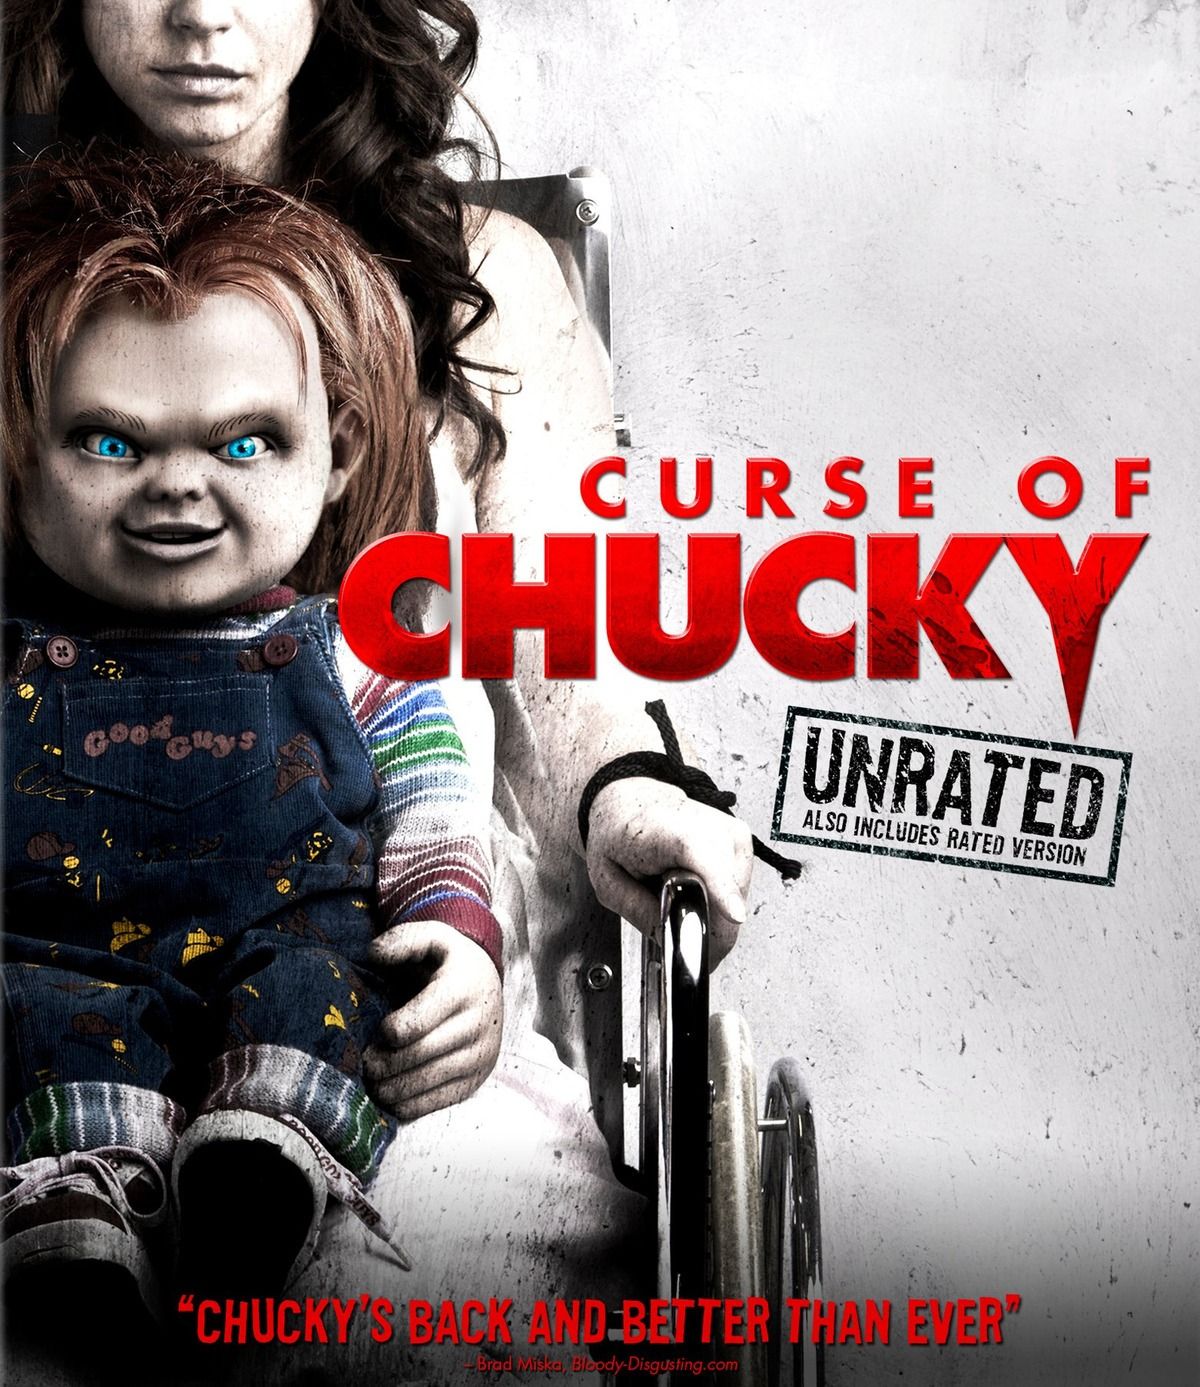 "Curse of Chucky" was also released in an unrated version